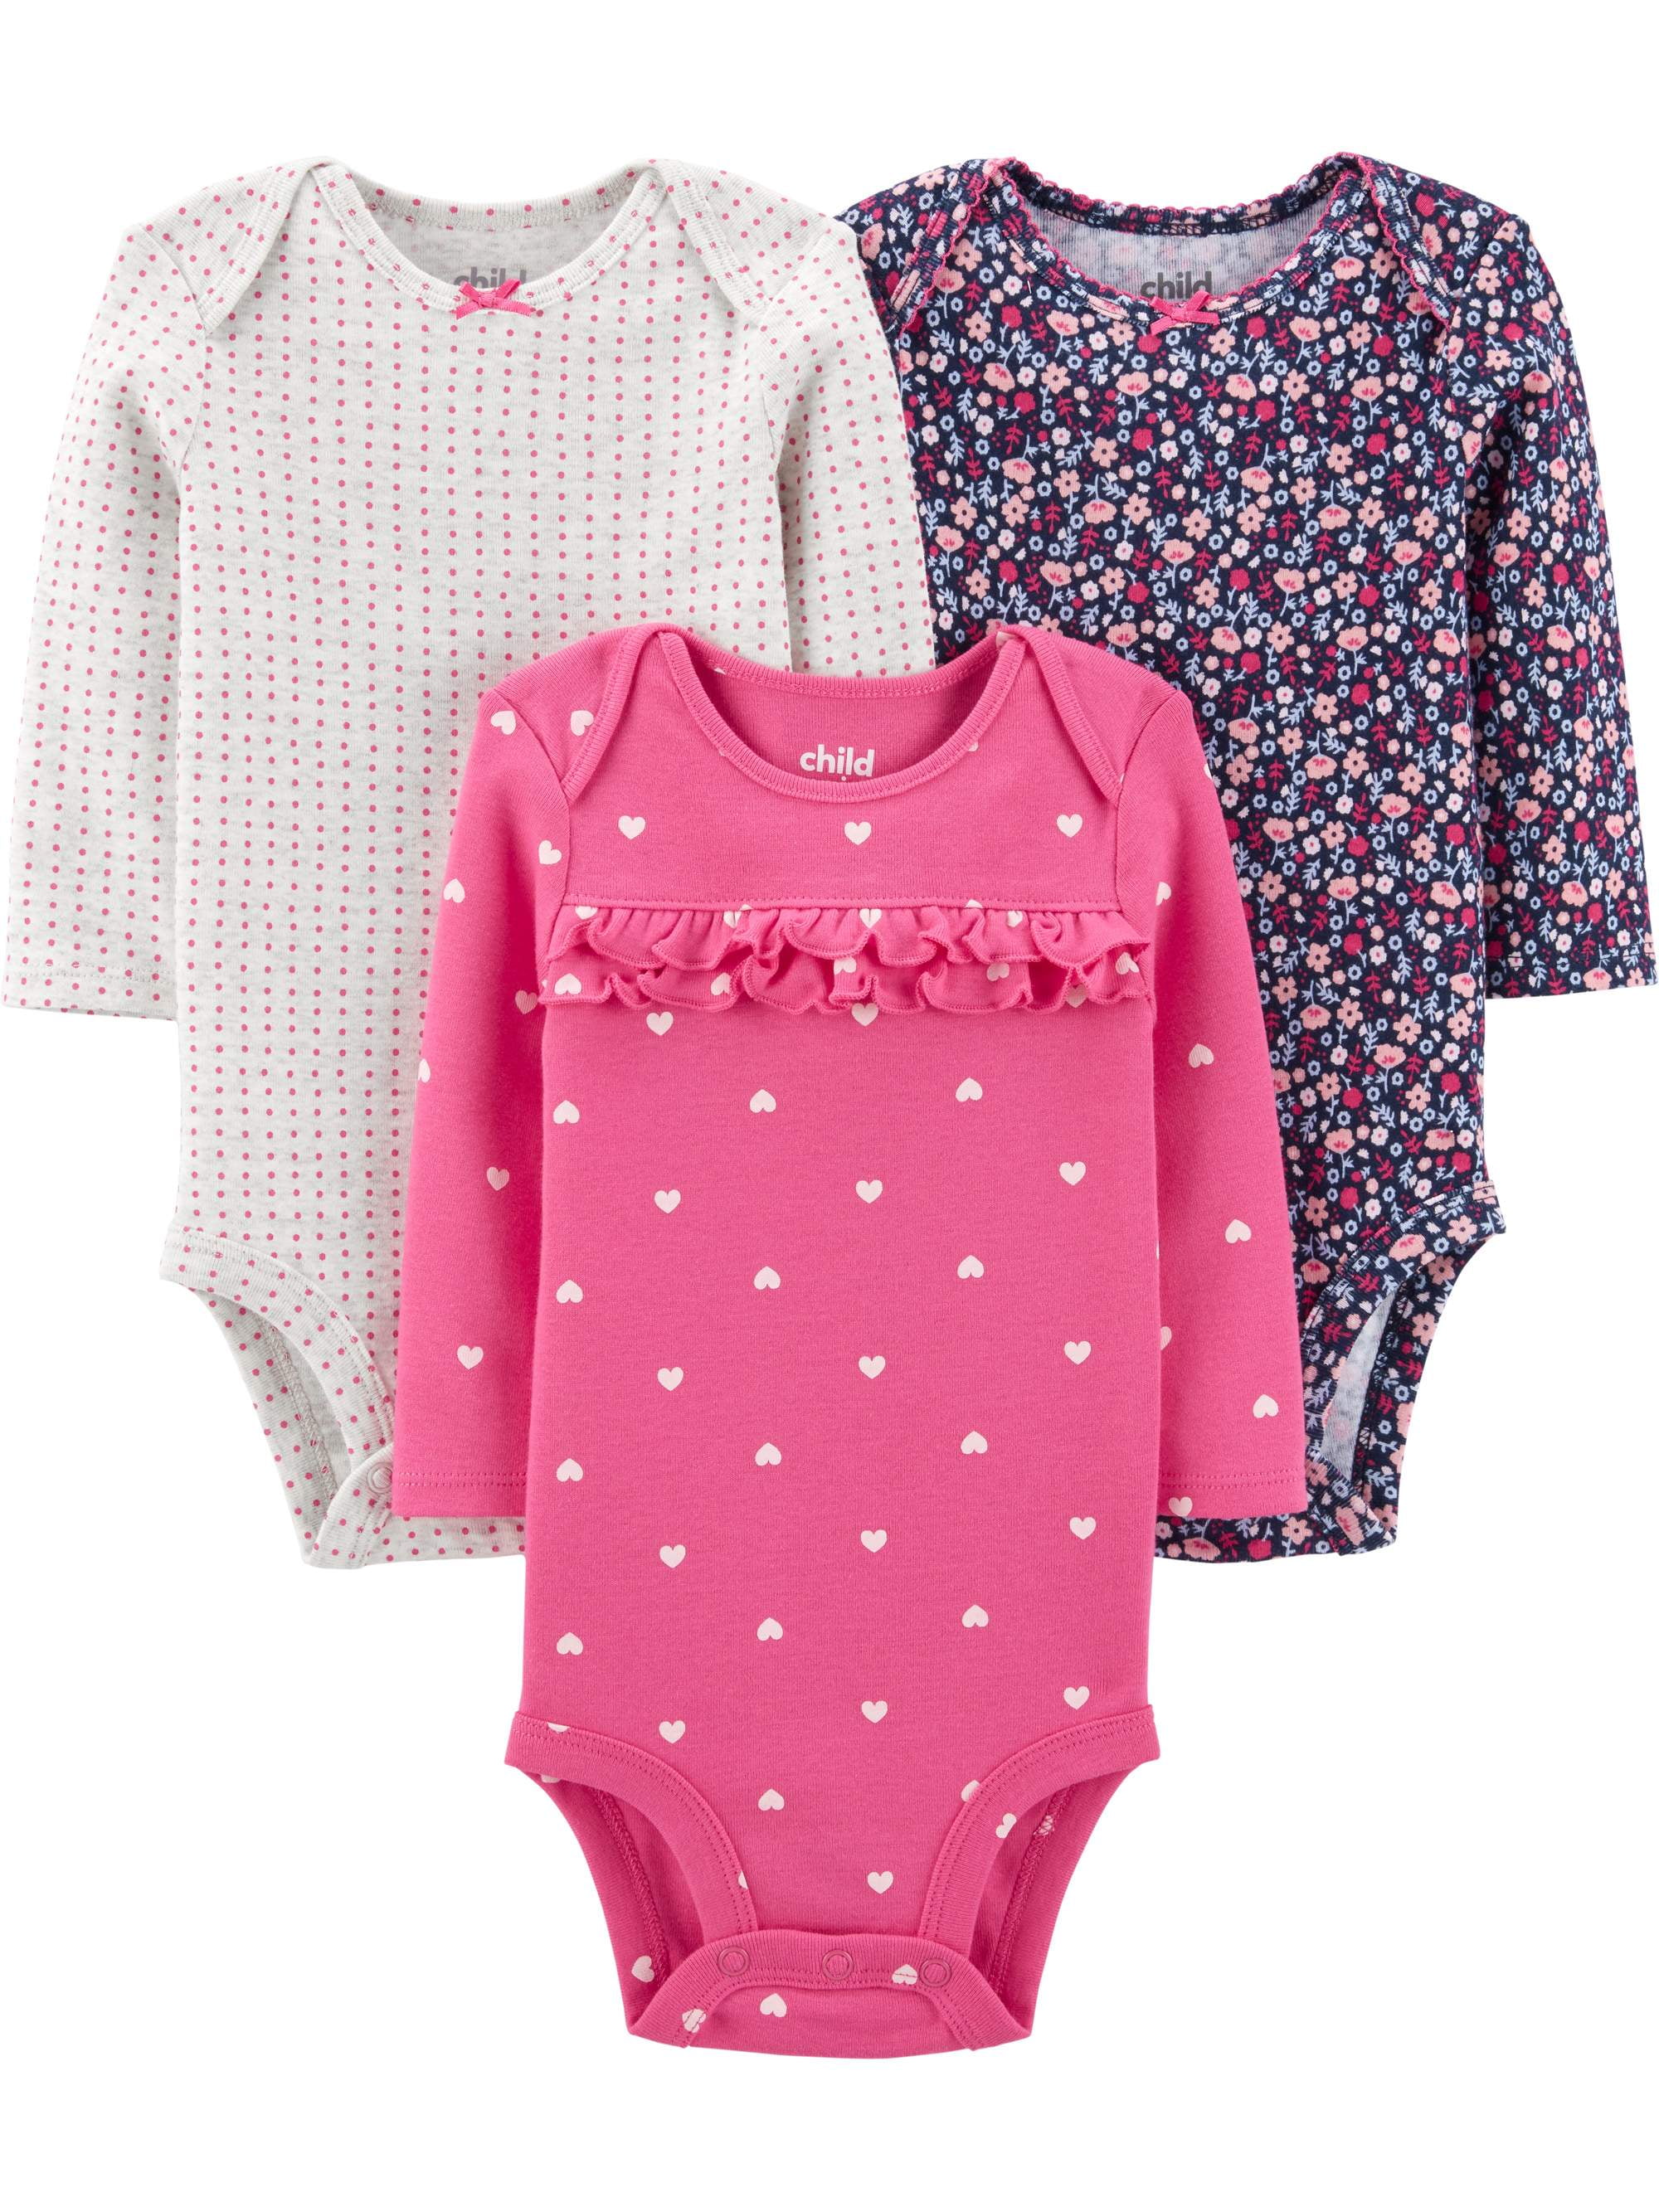 Carters Girl 3-6M Bodysuit Child of Mine Baby Girl 3 Piece Mommys NWT 